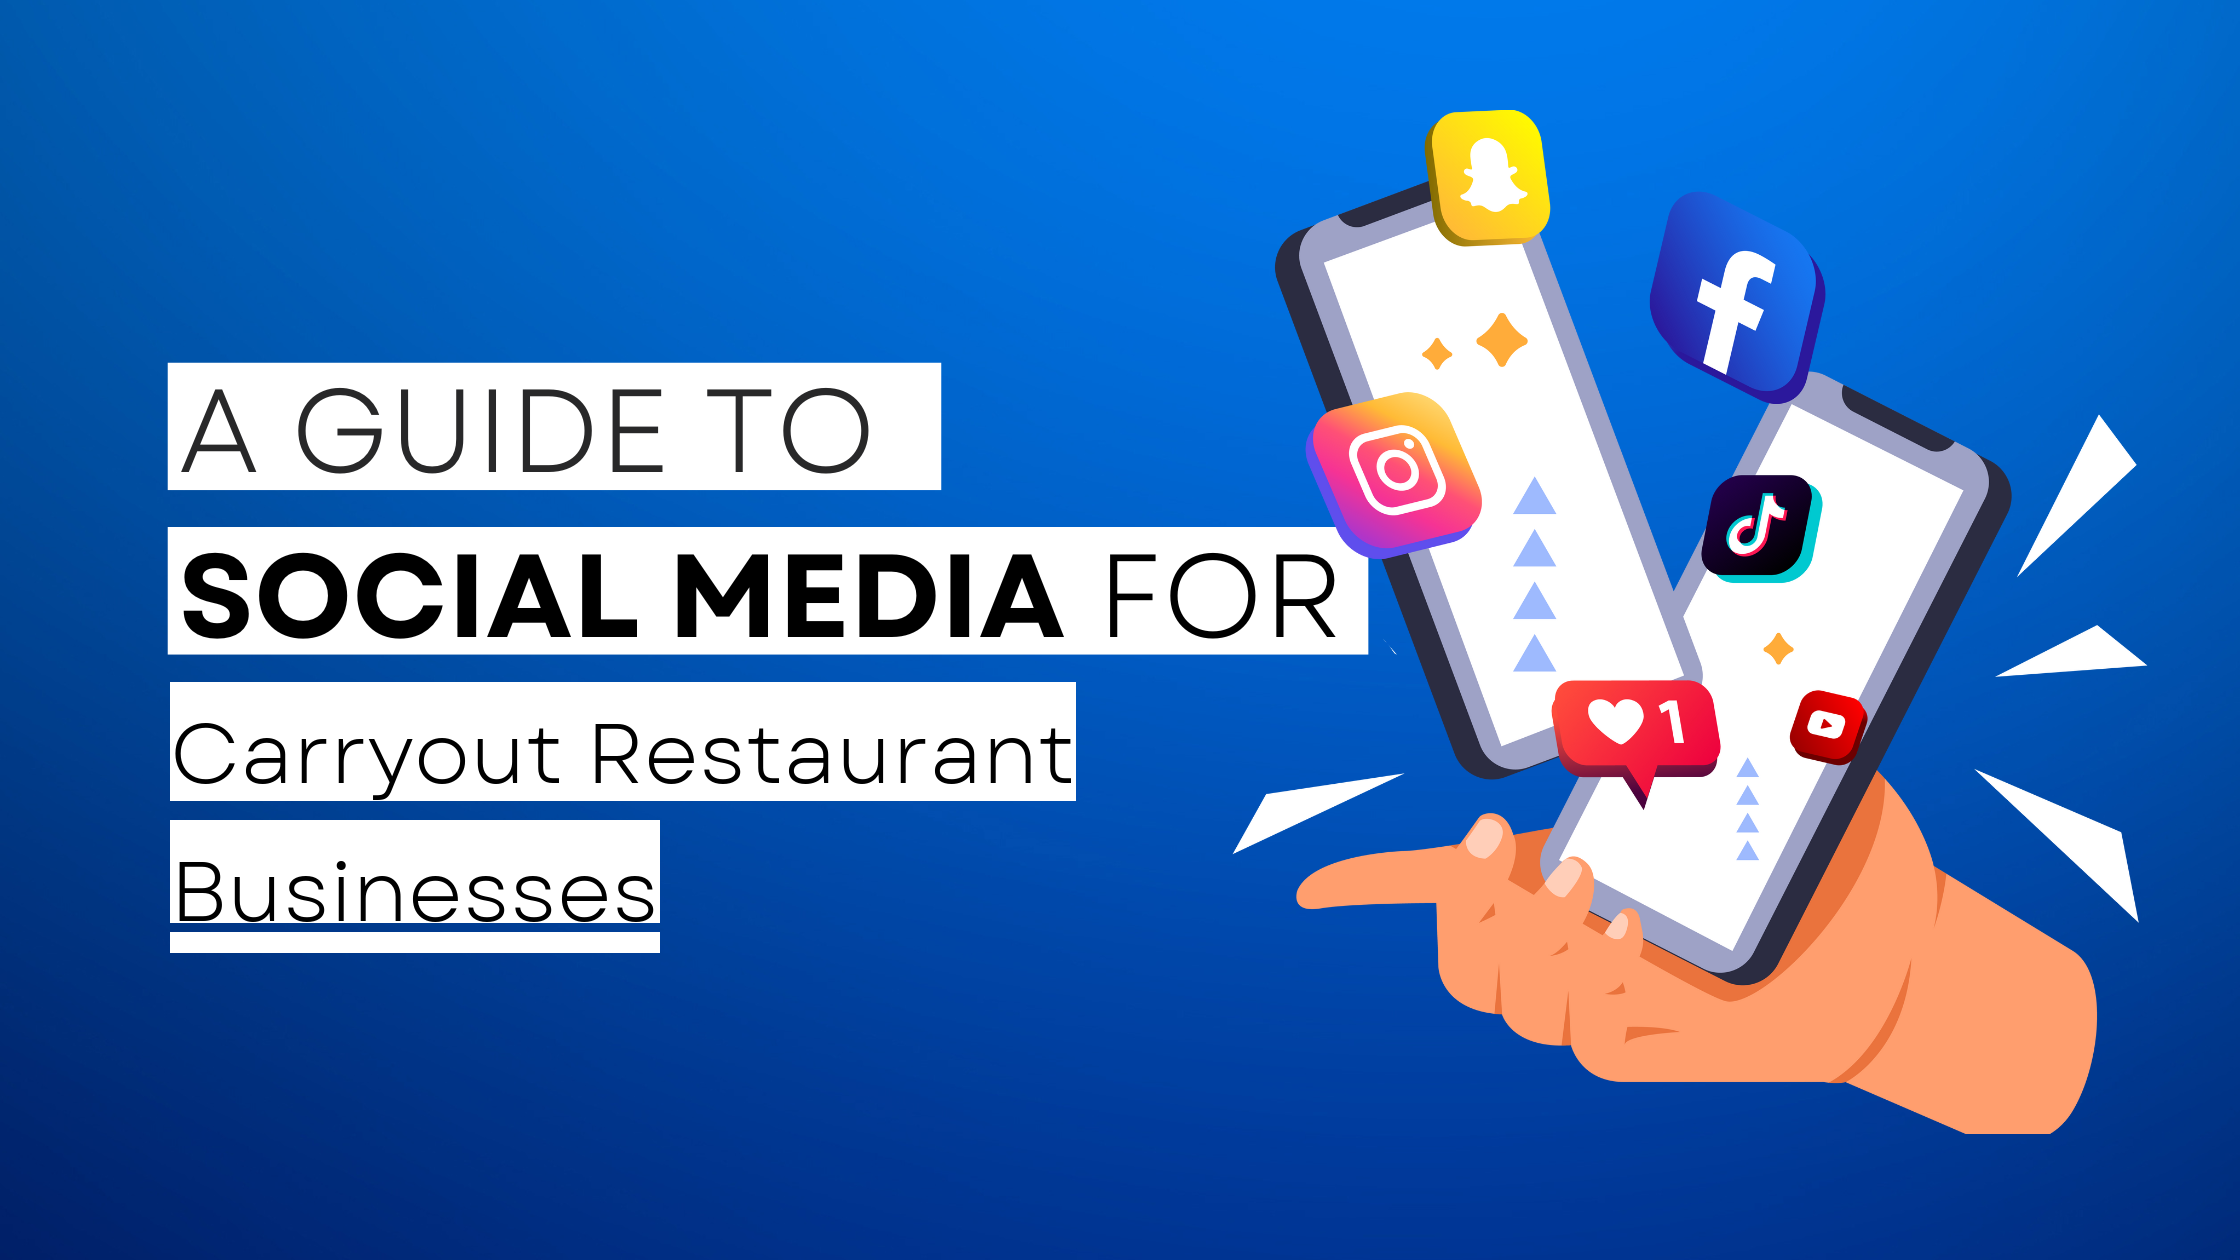 How to start Carryout Restaurant on social media